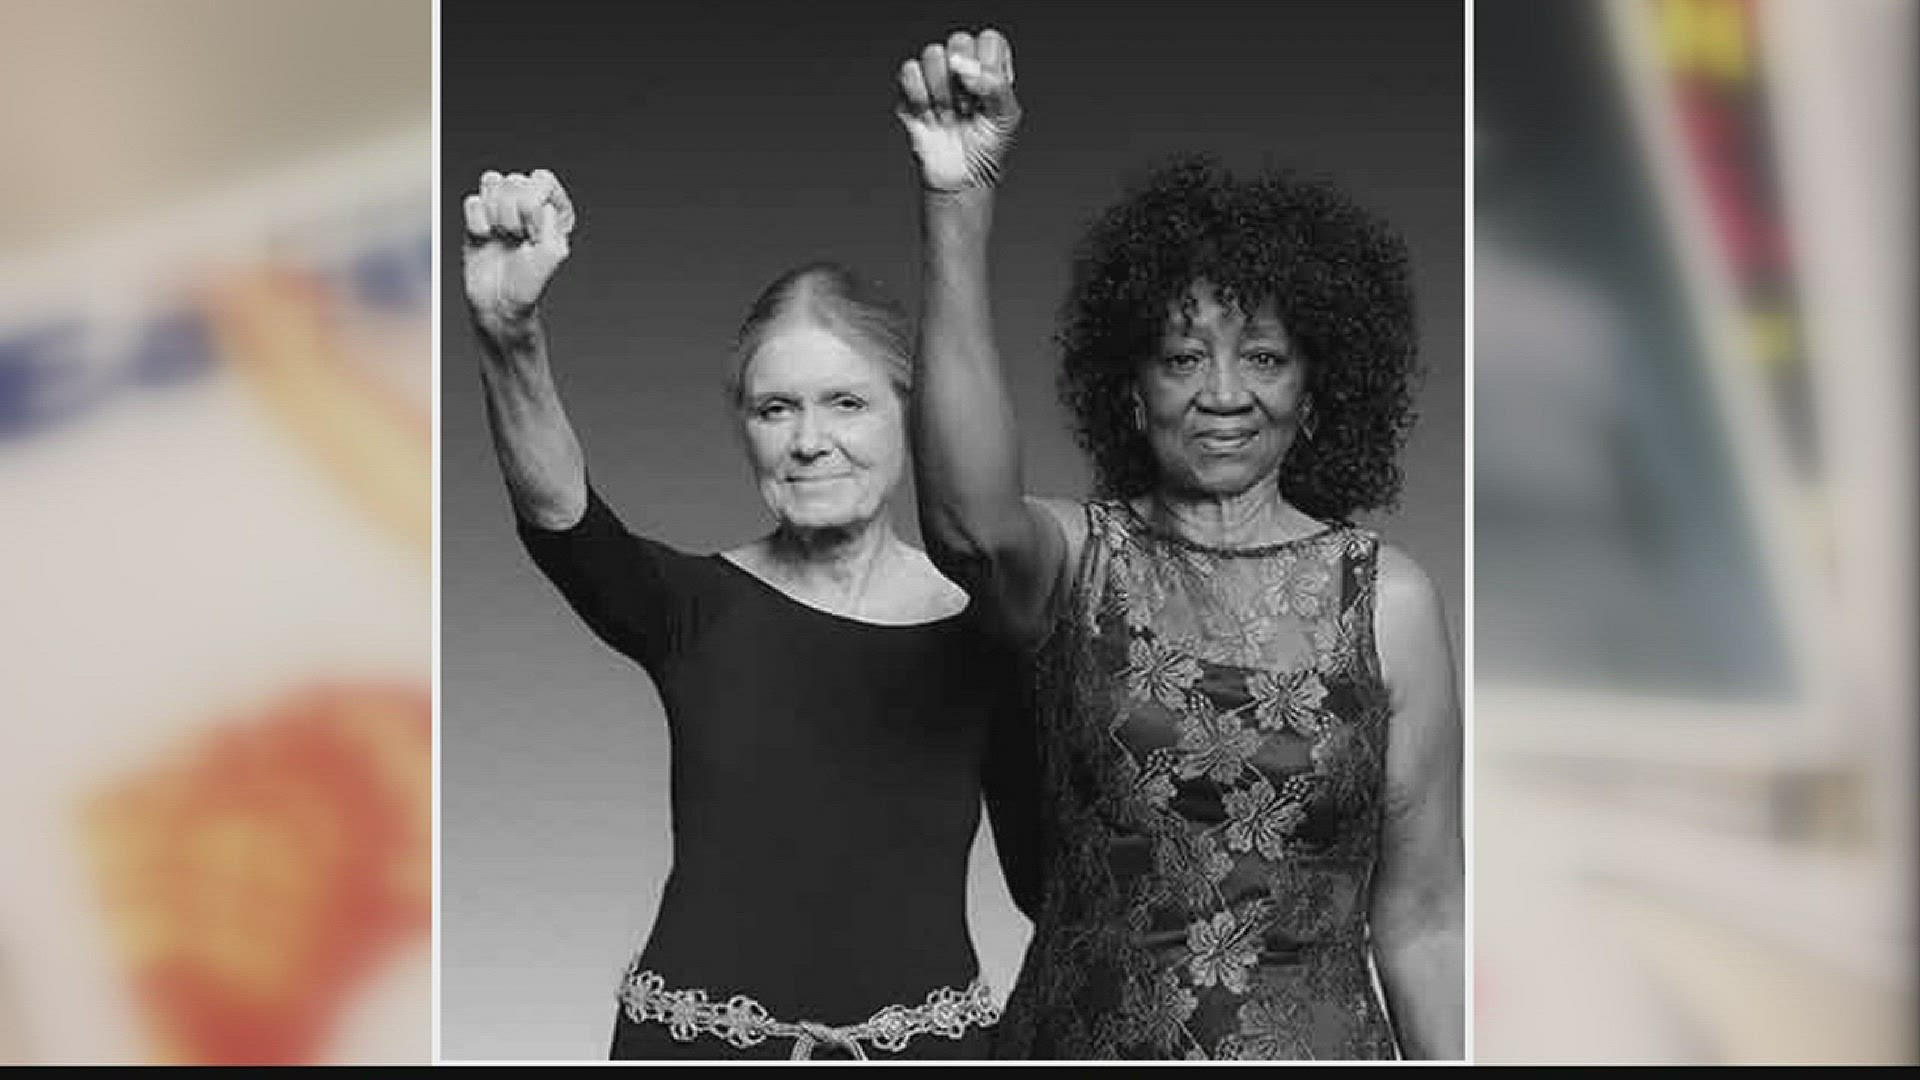 Gloria Steinem and Dorothy Pitman-Hughes recreated a photo they took in the 1970s, symbolizes the feminist movement and fight for equality for women and people of color.